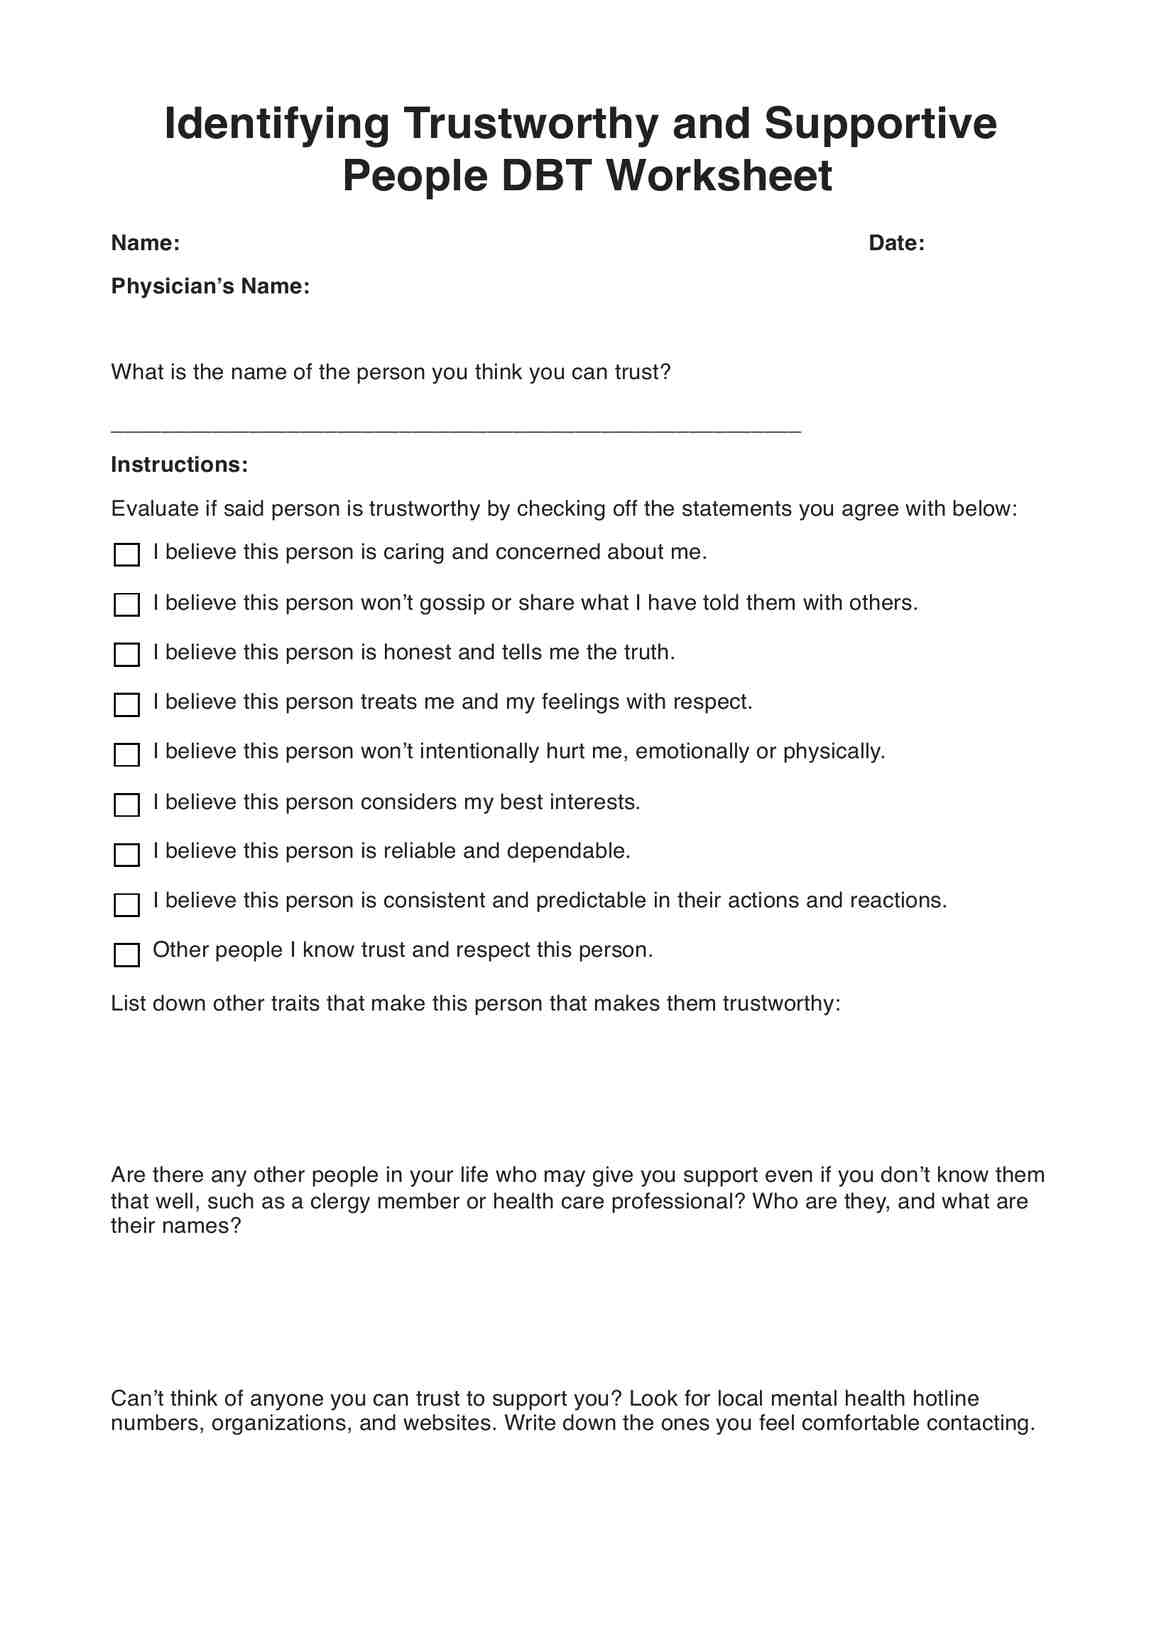 Identifying Trustworthy and Supportive People DBT Worksheet PDF Example